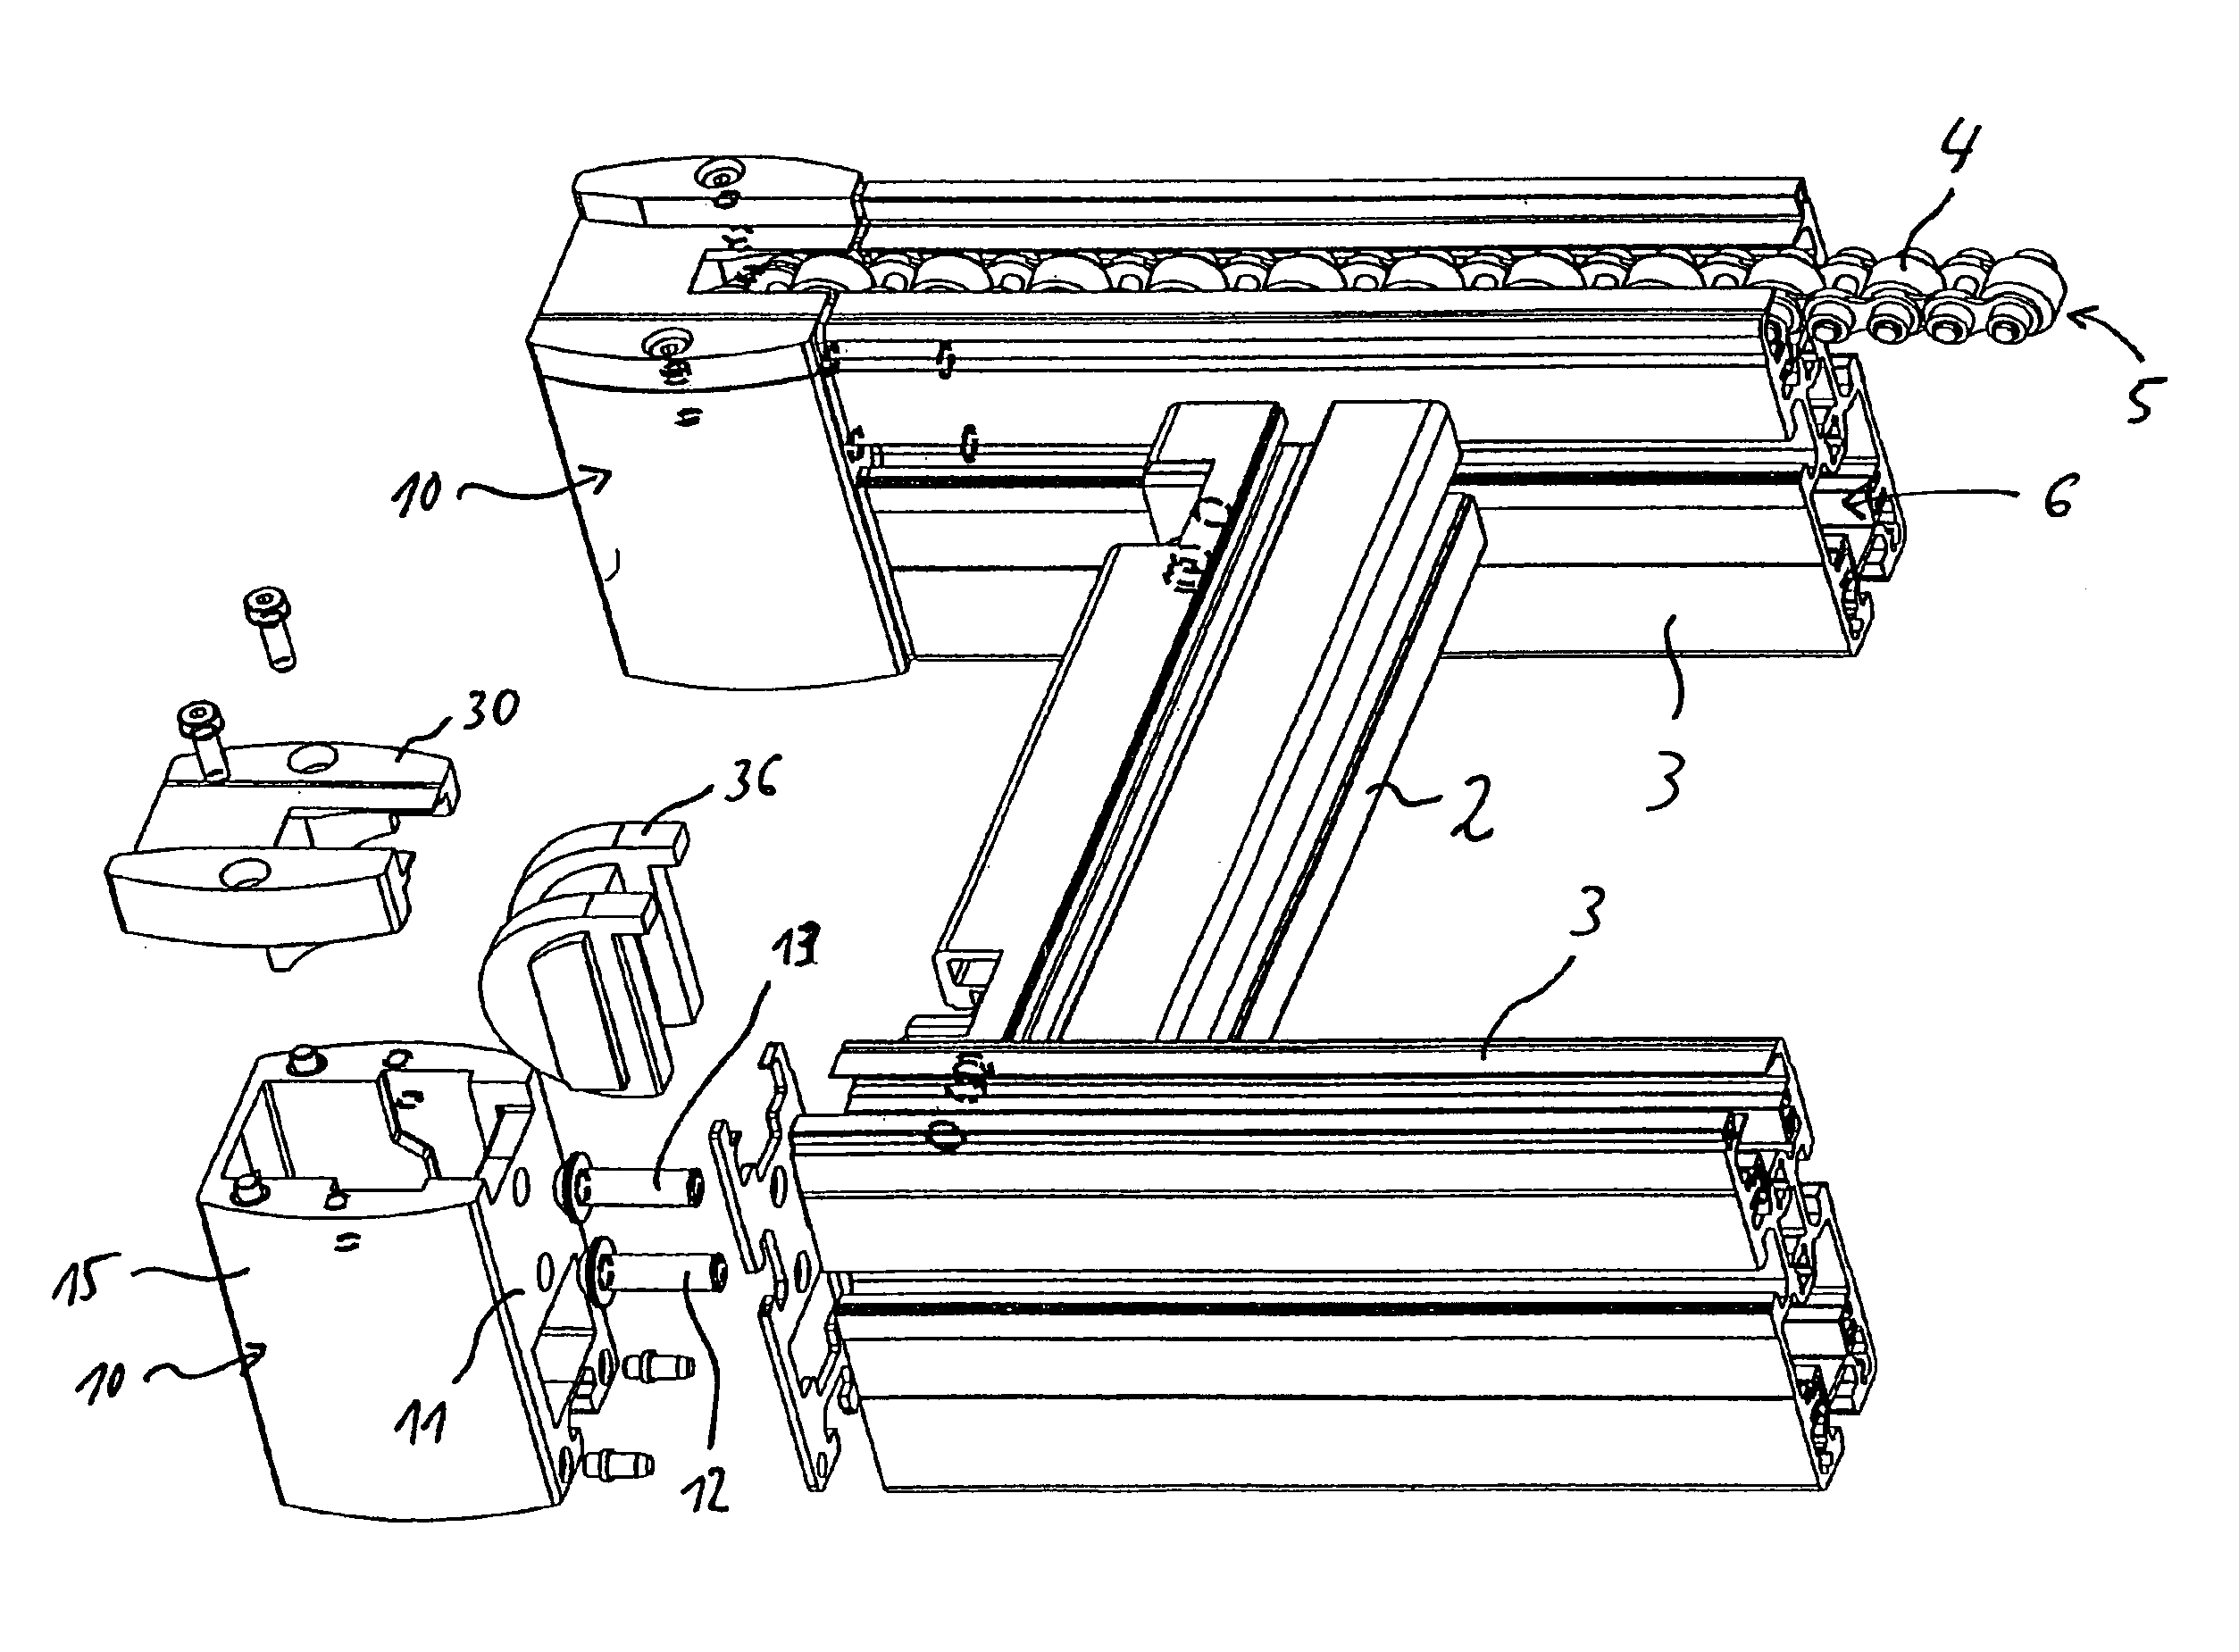 Redirecting device for a conveying means located on a conveying section